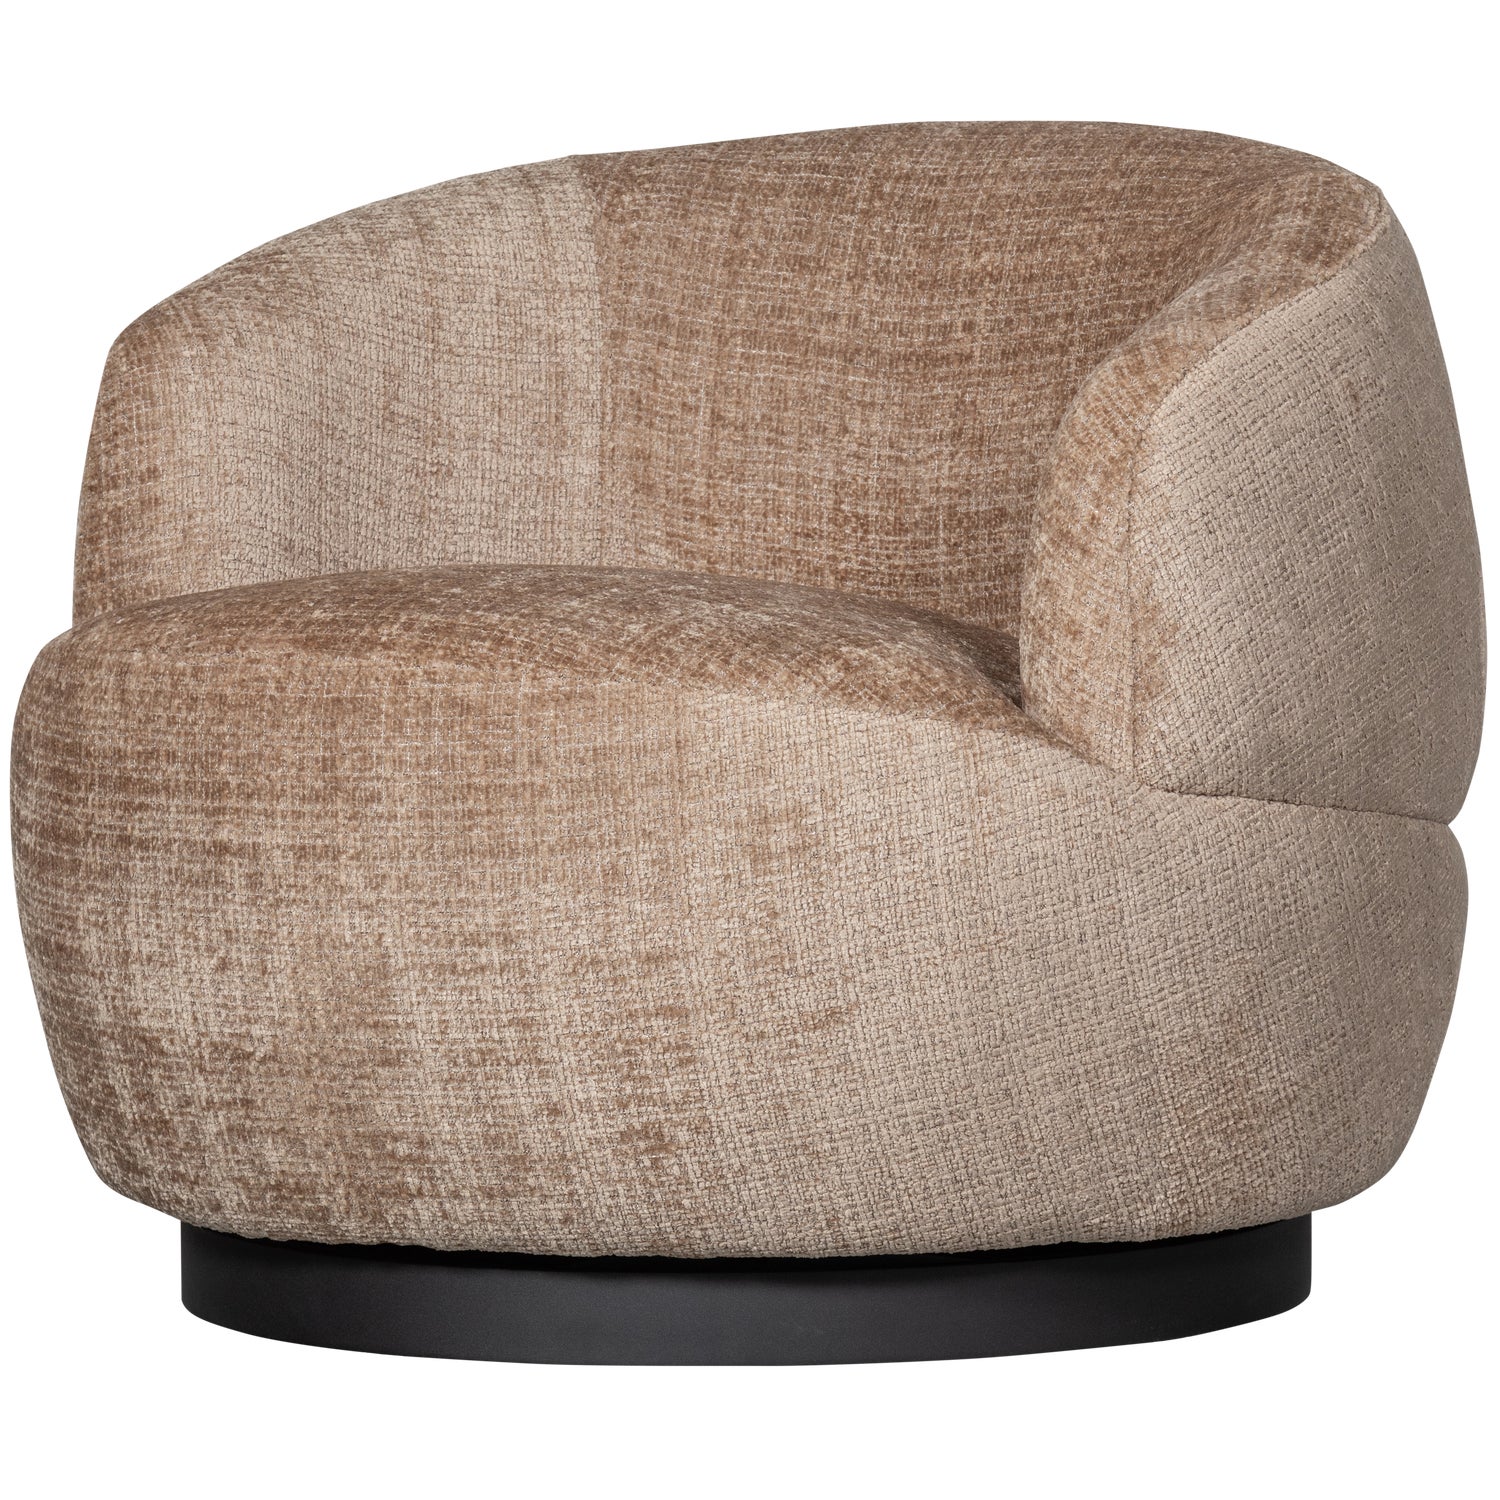 800037-S-02_VS_FA_Woolly_draaifauteuil_chenille_zand_SA.png?auto=webp&format=png&width=1500&height=1500